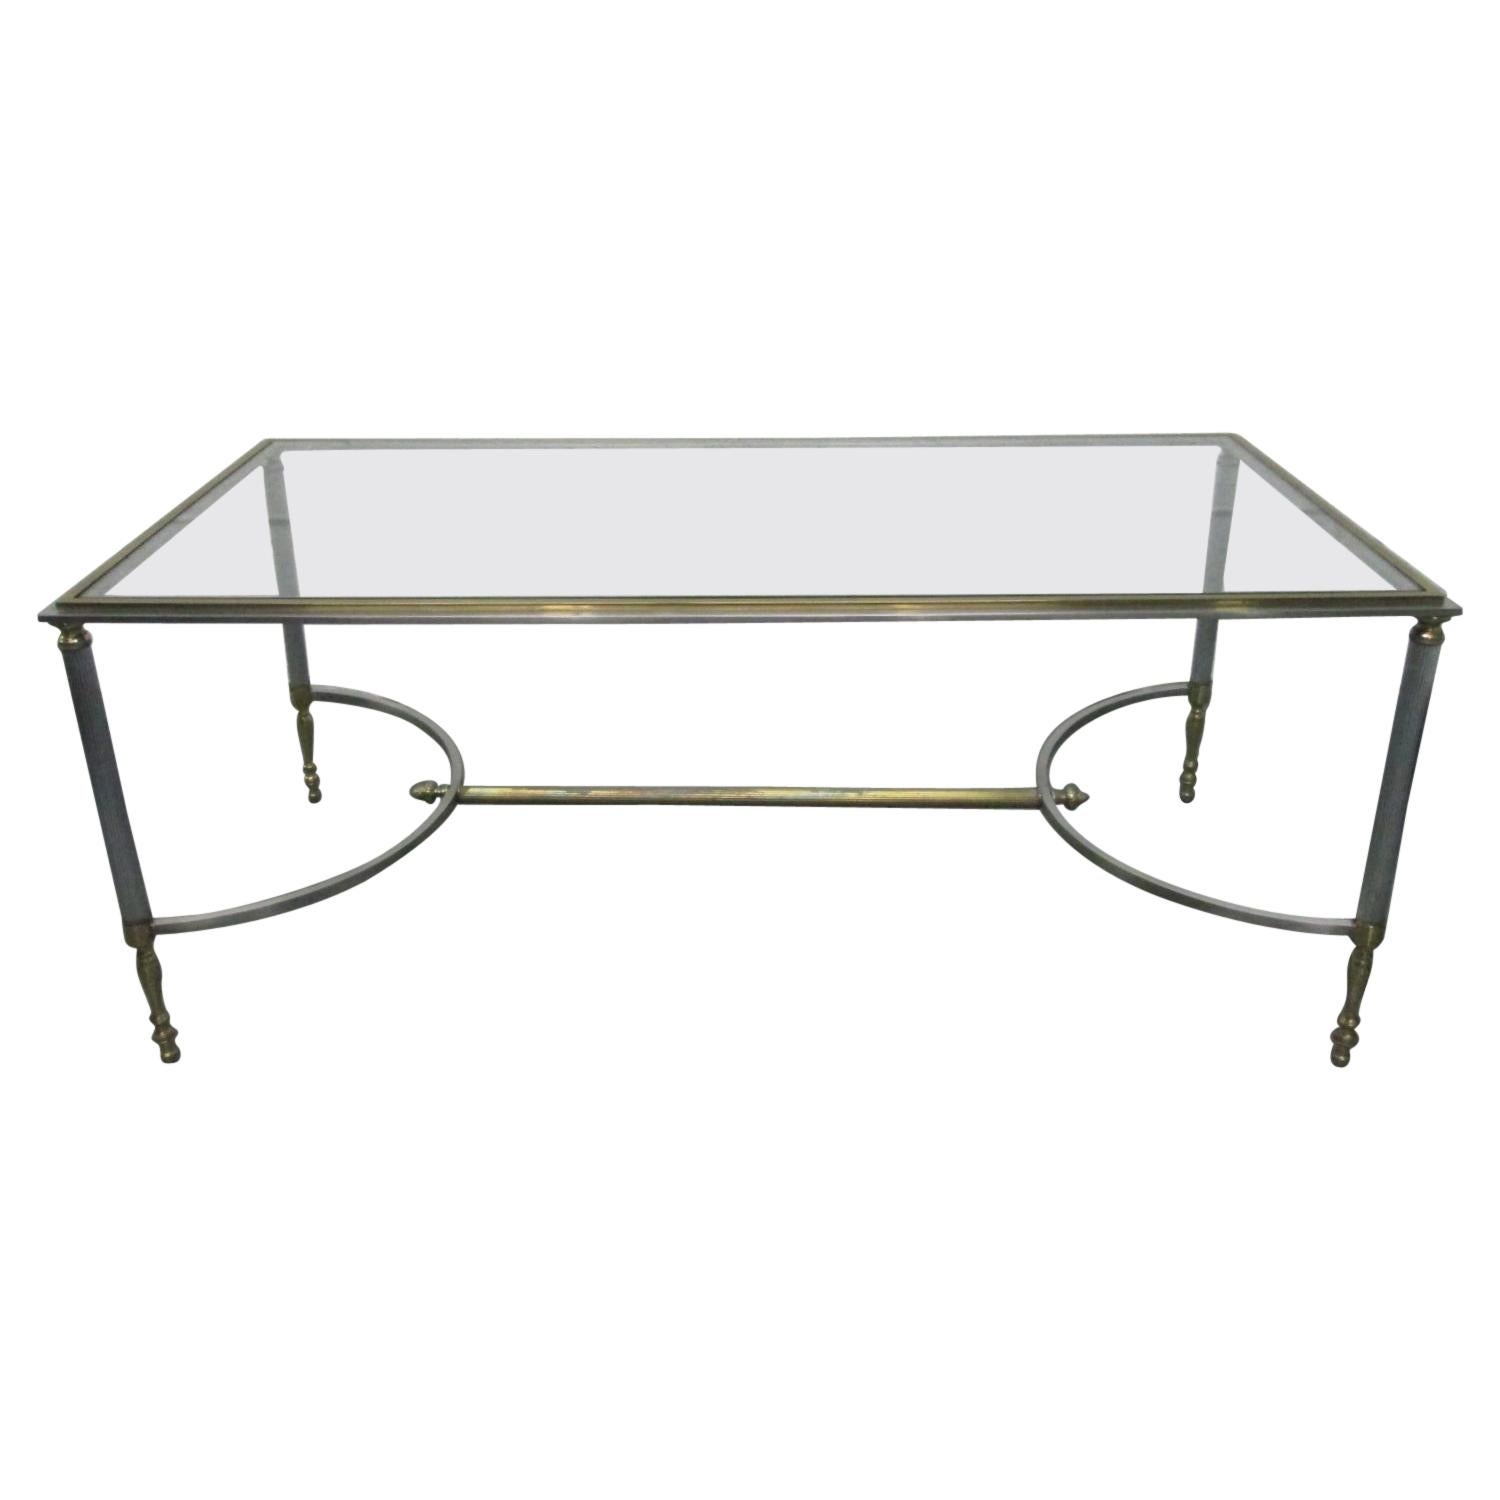 Maison Jansen Polished Steel and Brass Coffee Table